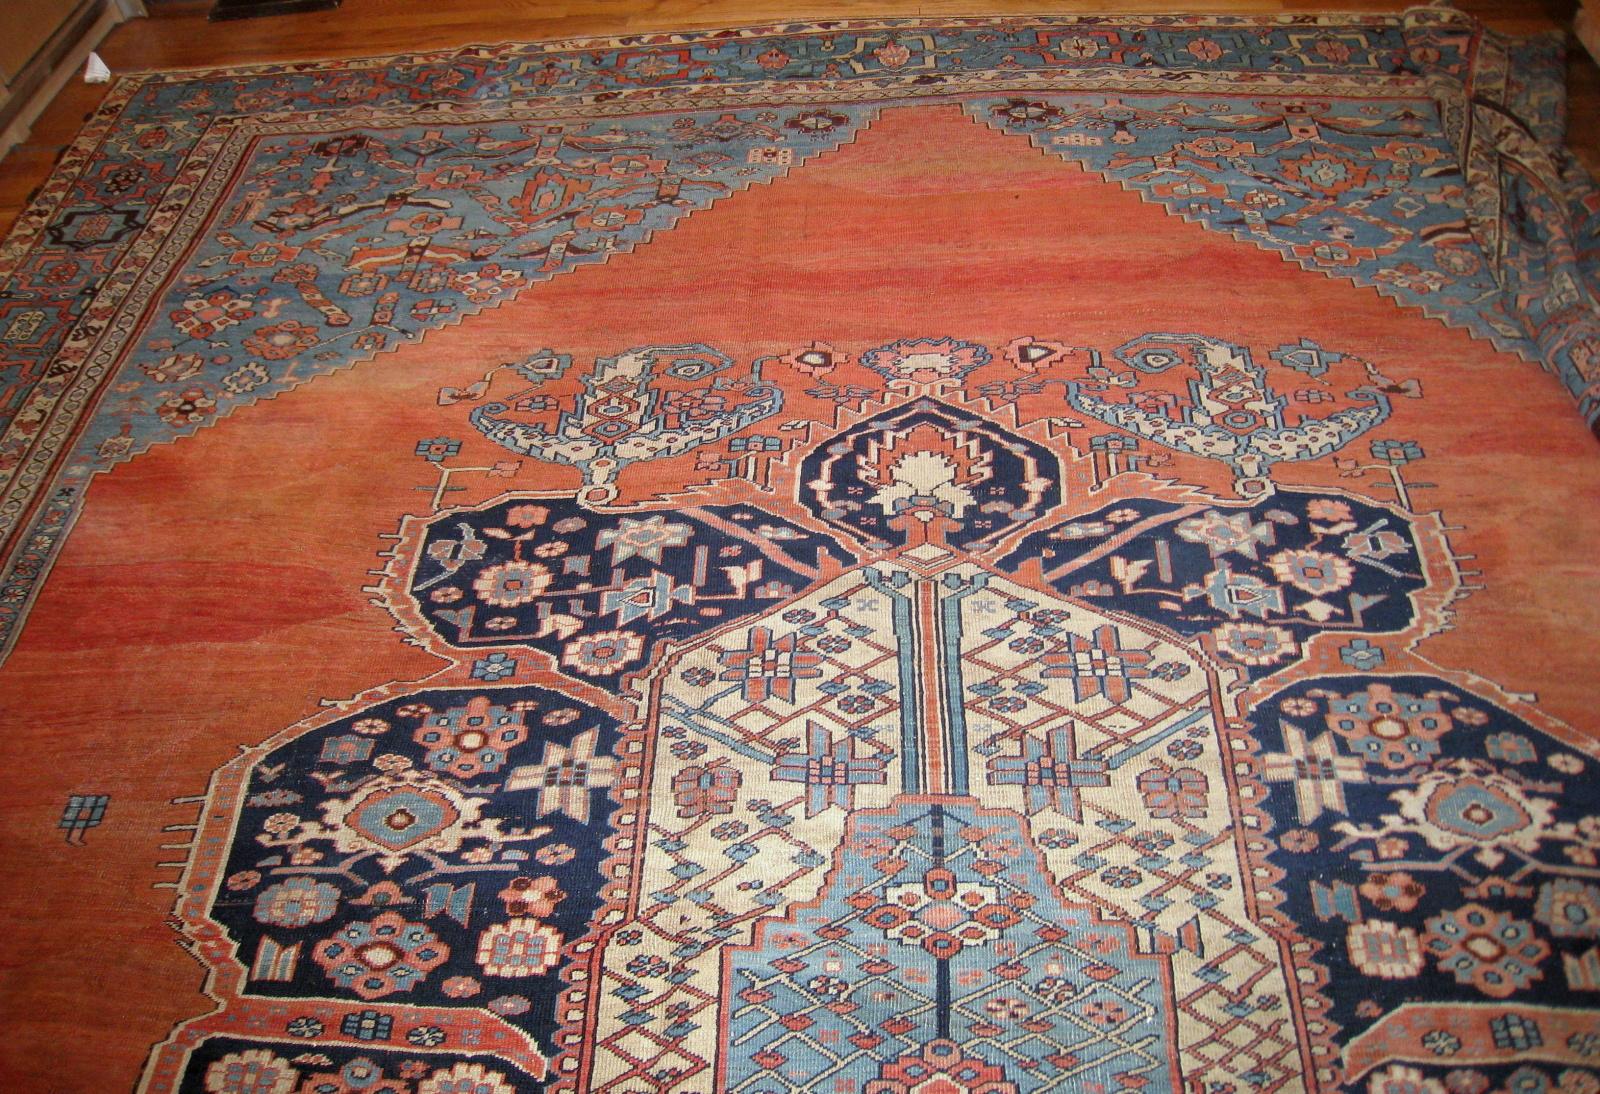 Handmade antique Bakshaish style fine weave rug in good condition. The rug is from the end of 19th century.

- Condition: Good,

- circa 1880s,

- Size: 11' x 15.7' (335cm x 478cm),

- Material: Wool,

- Country of origin: Middle